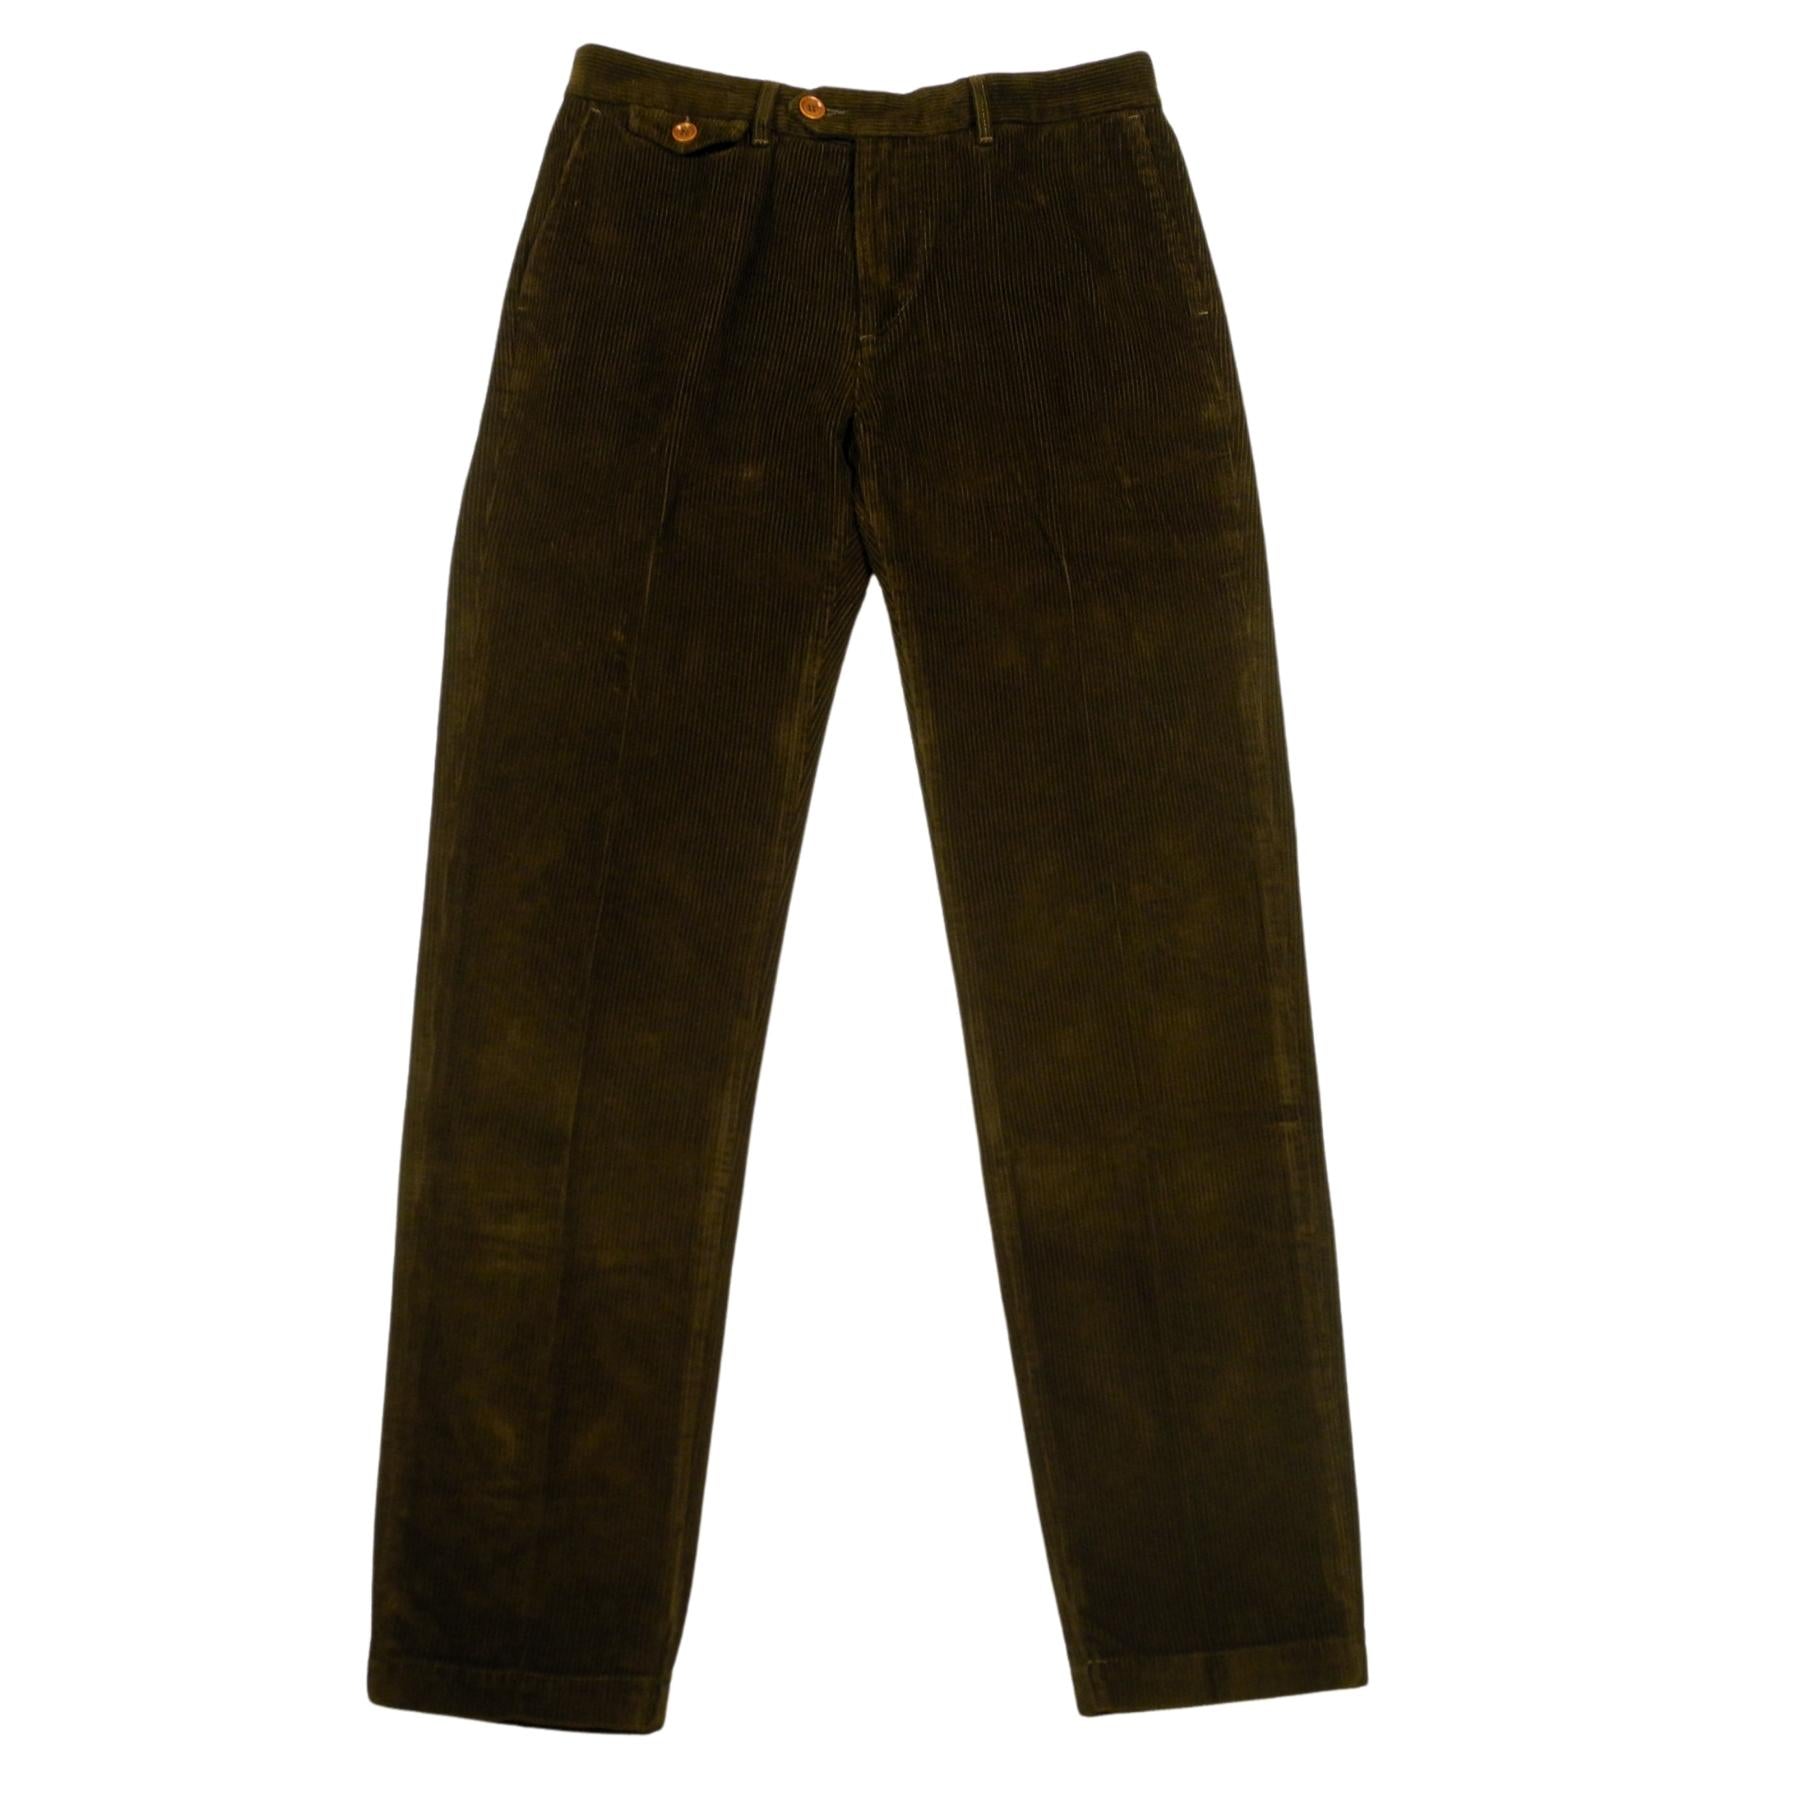 Ribbed trousers in Brown Genoa canvas velvet